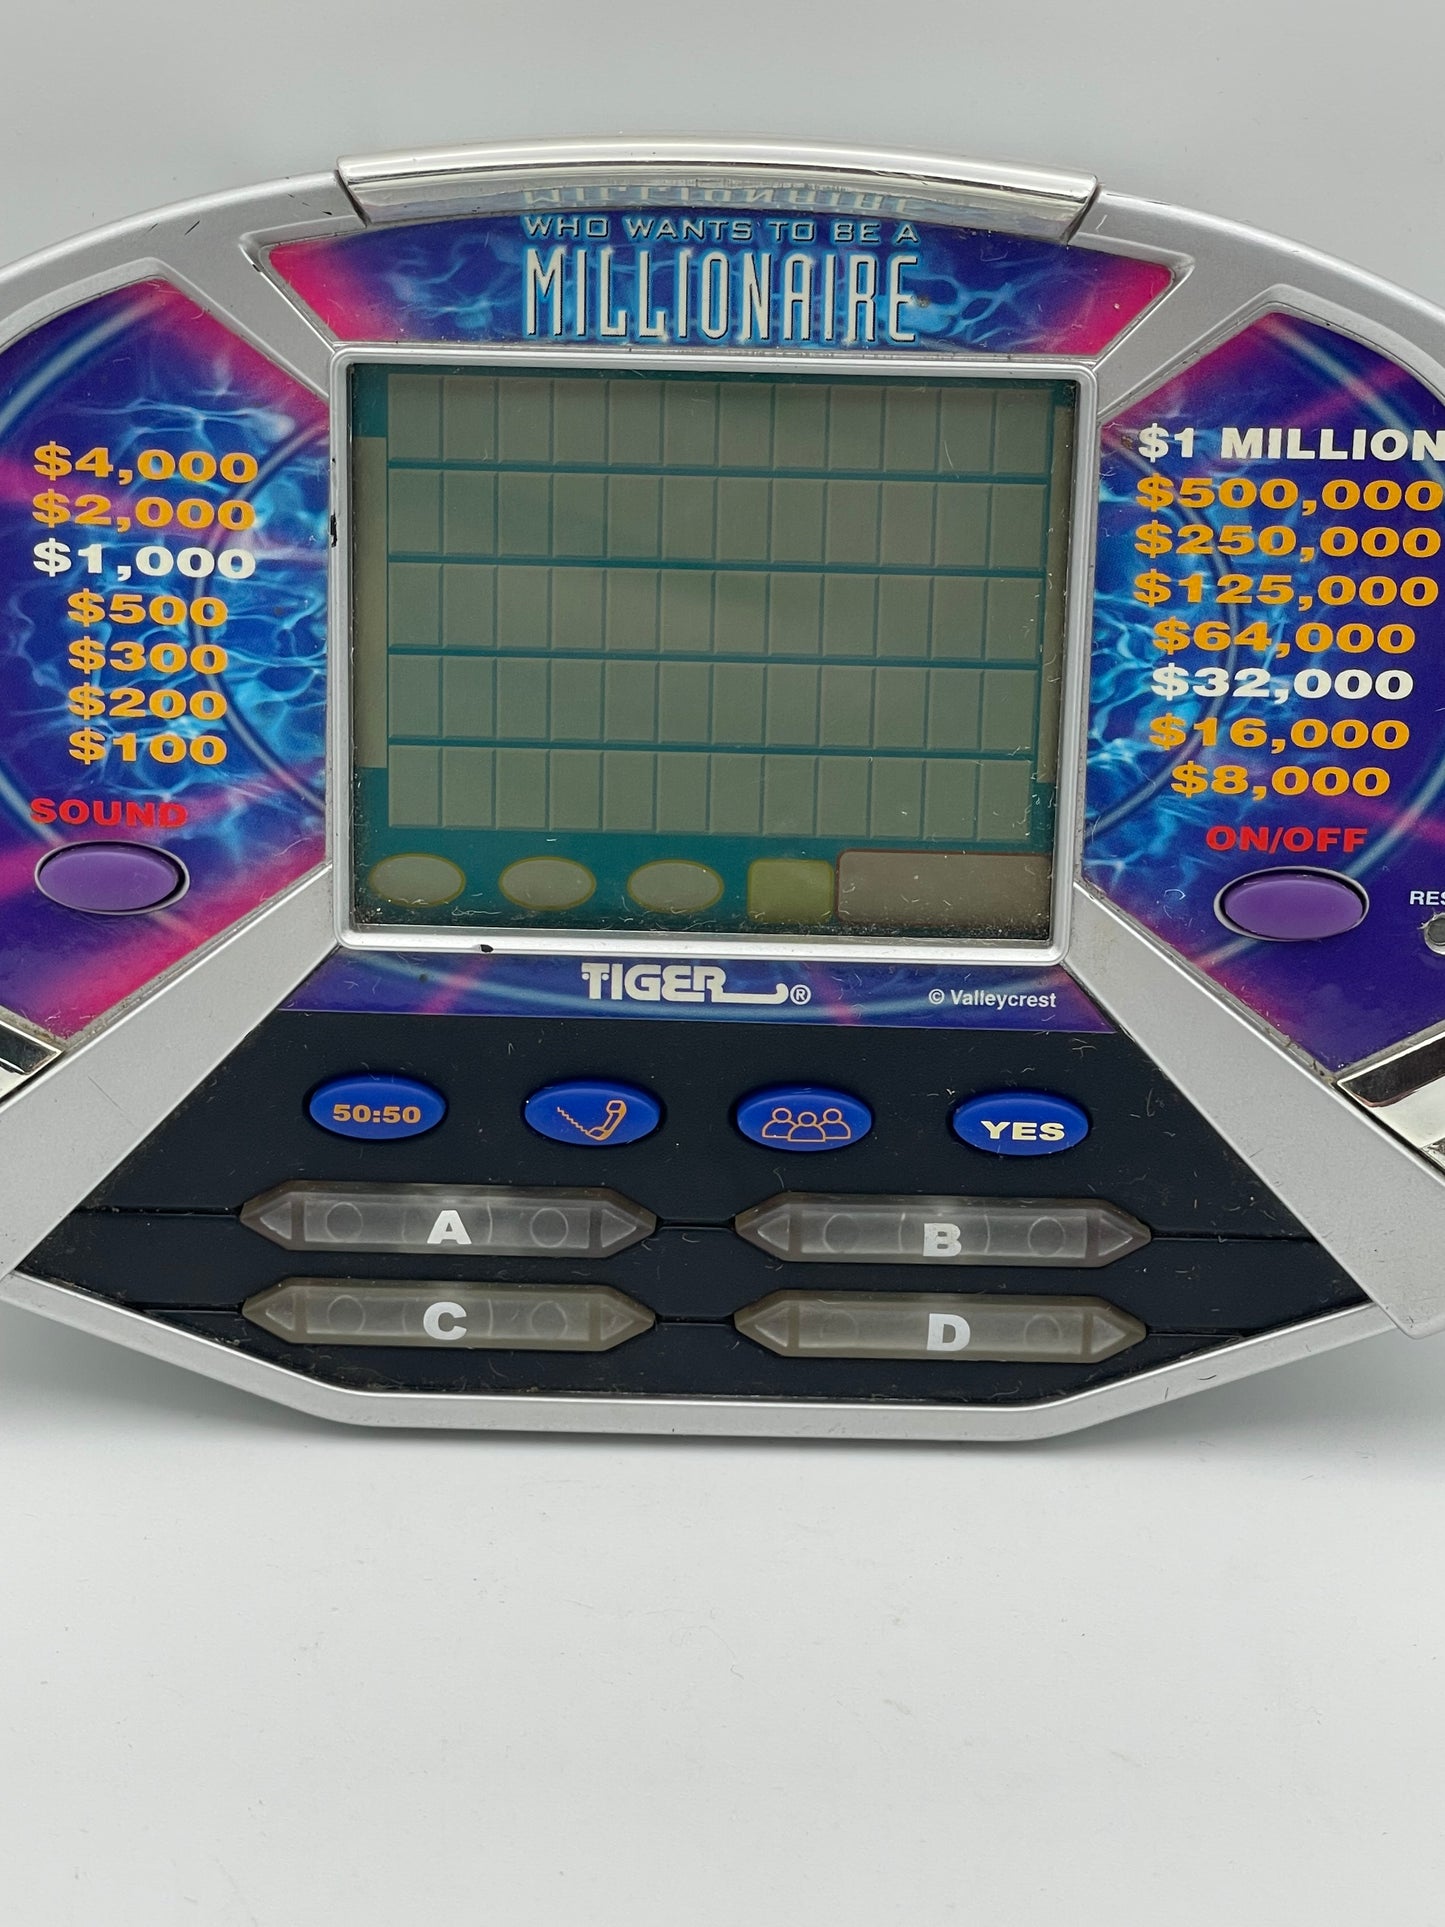 Tiger Electronics - Who Wants to be a Millionaire Handheld Game 2000 #102922